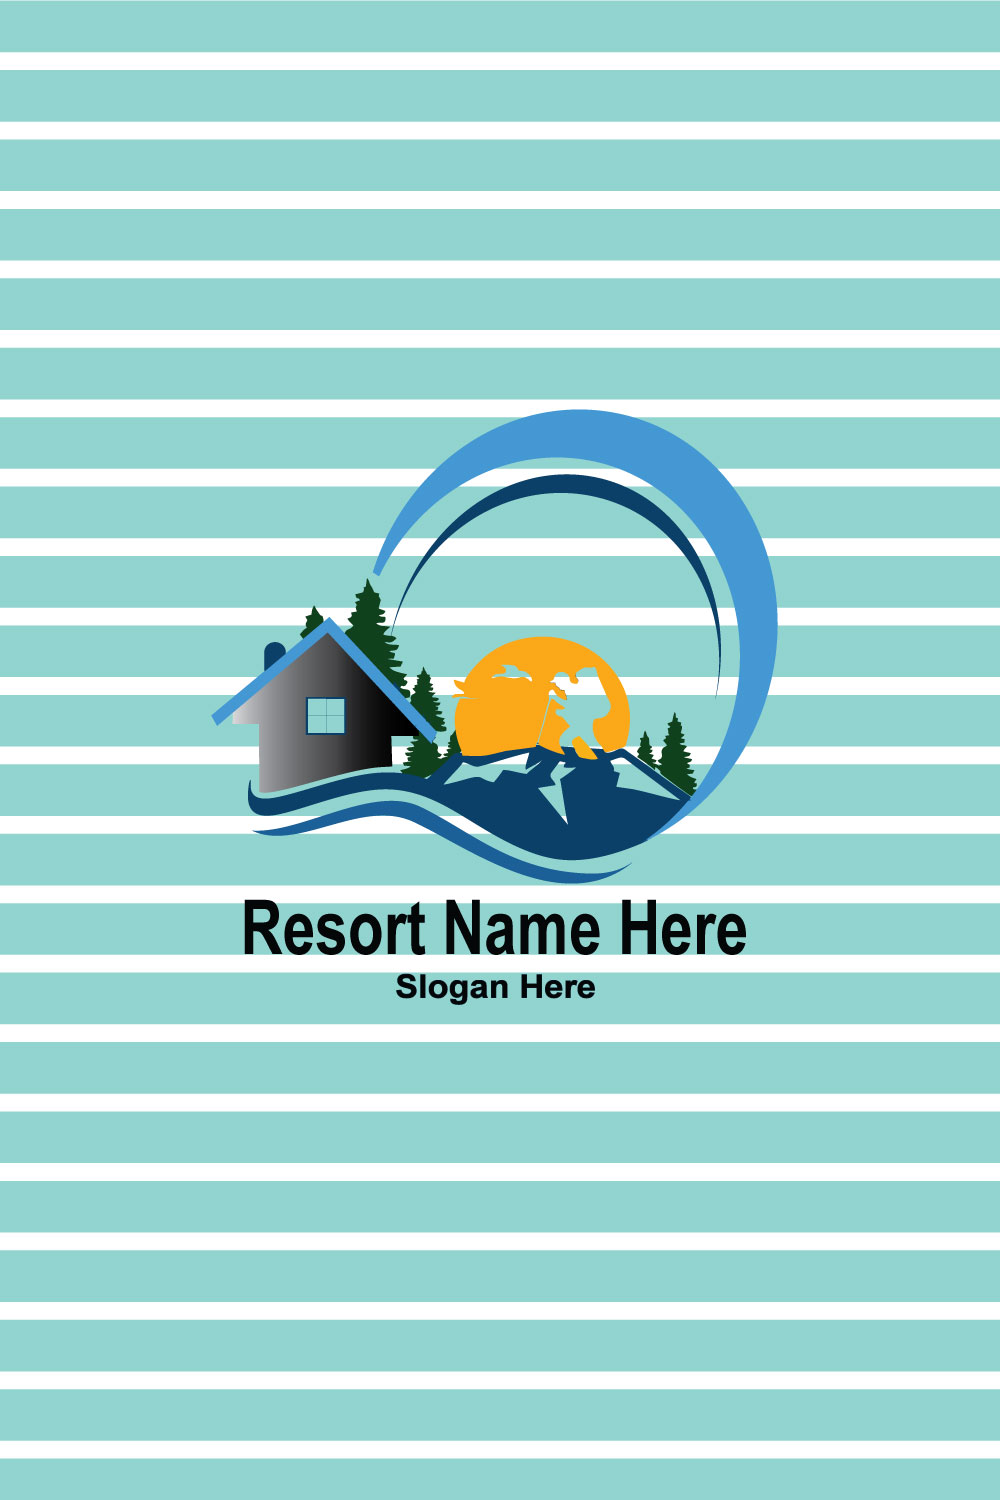 Beach Resort PNG Transparent Images Free Download | Vector Files | Pngtree